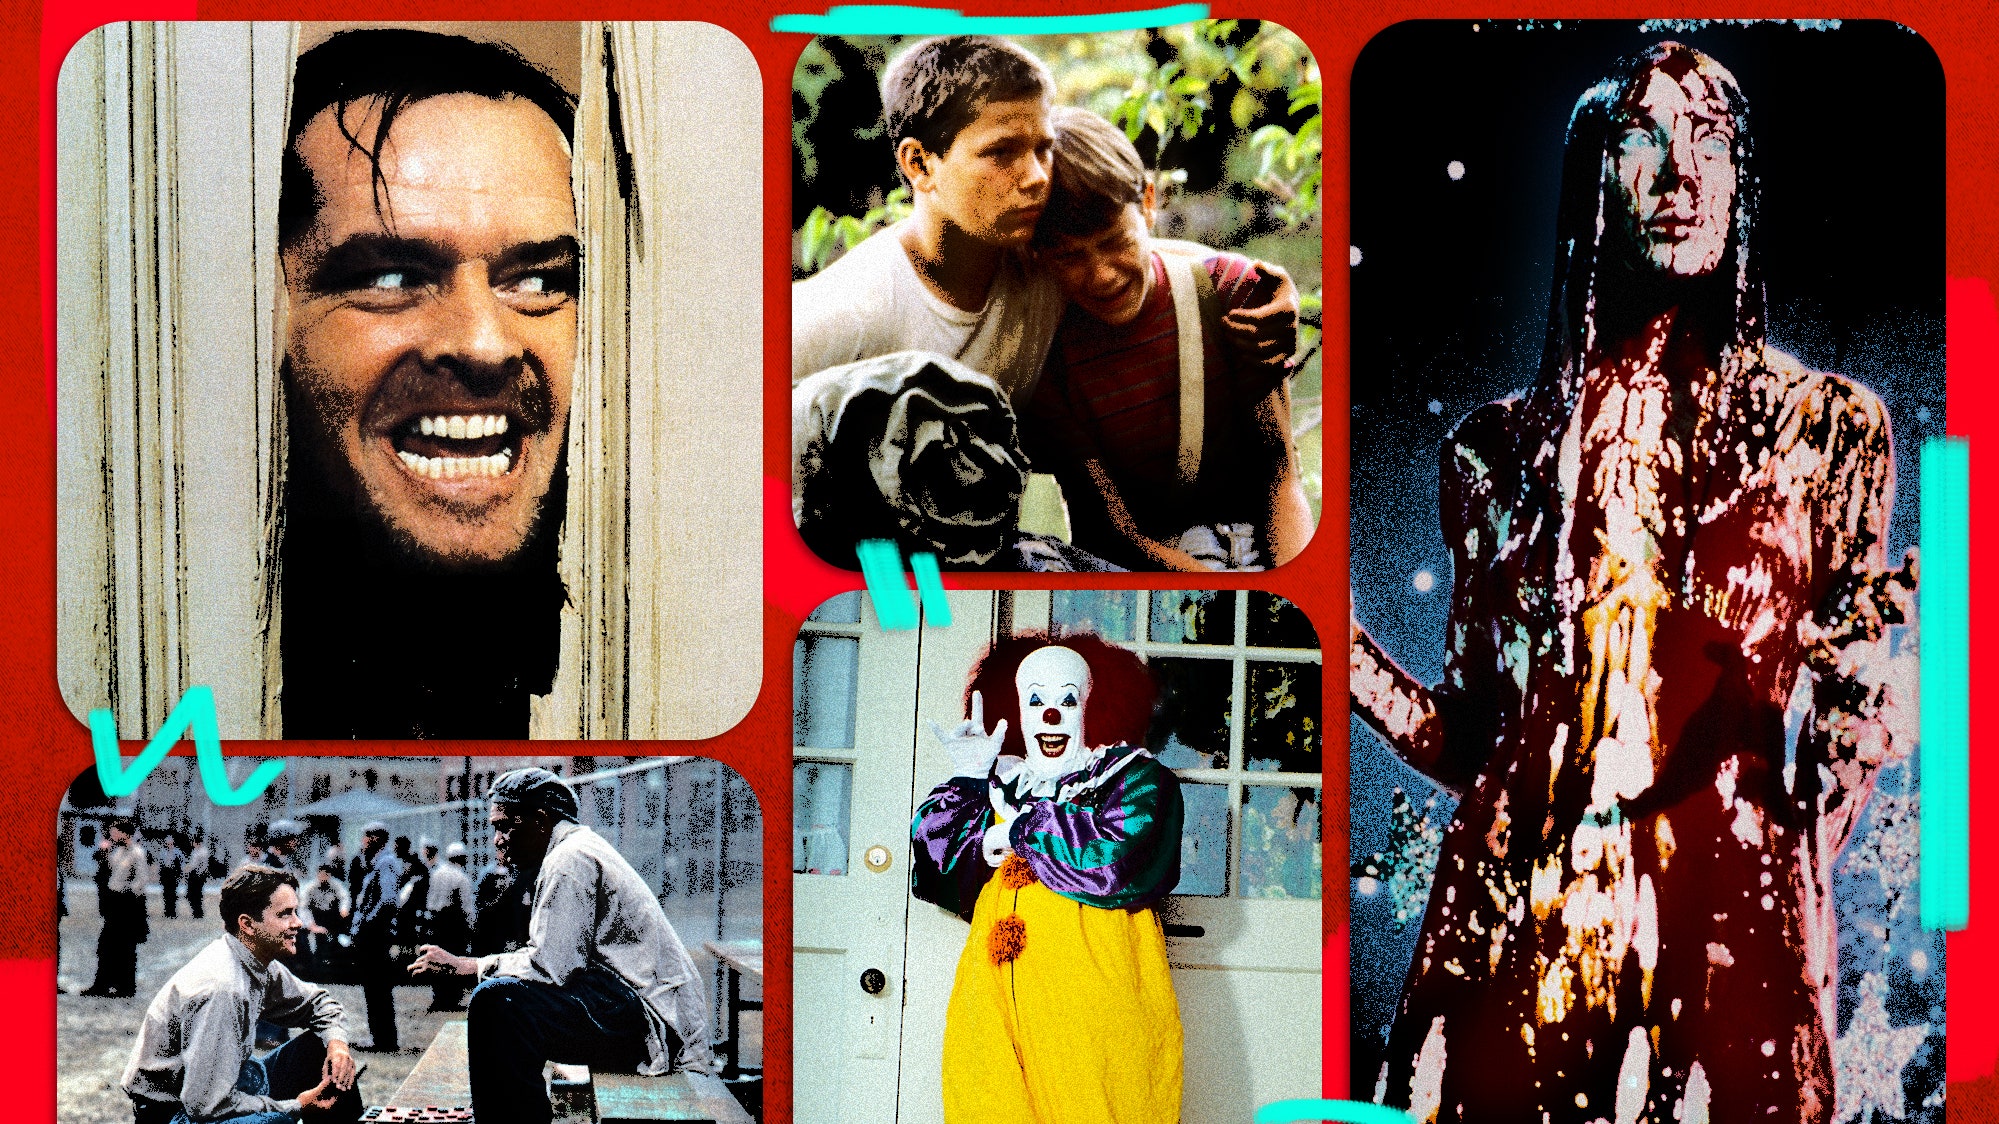 What is the most recent Stephen King movie adaptation?